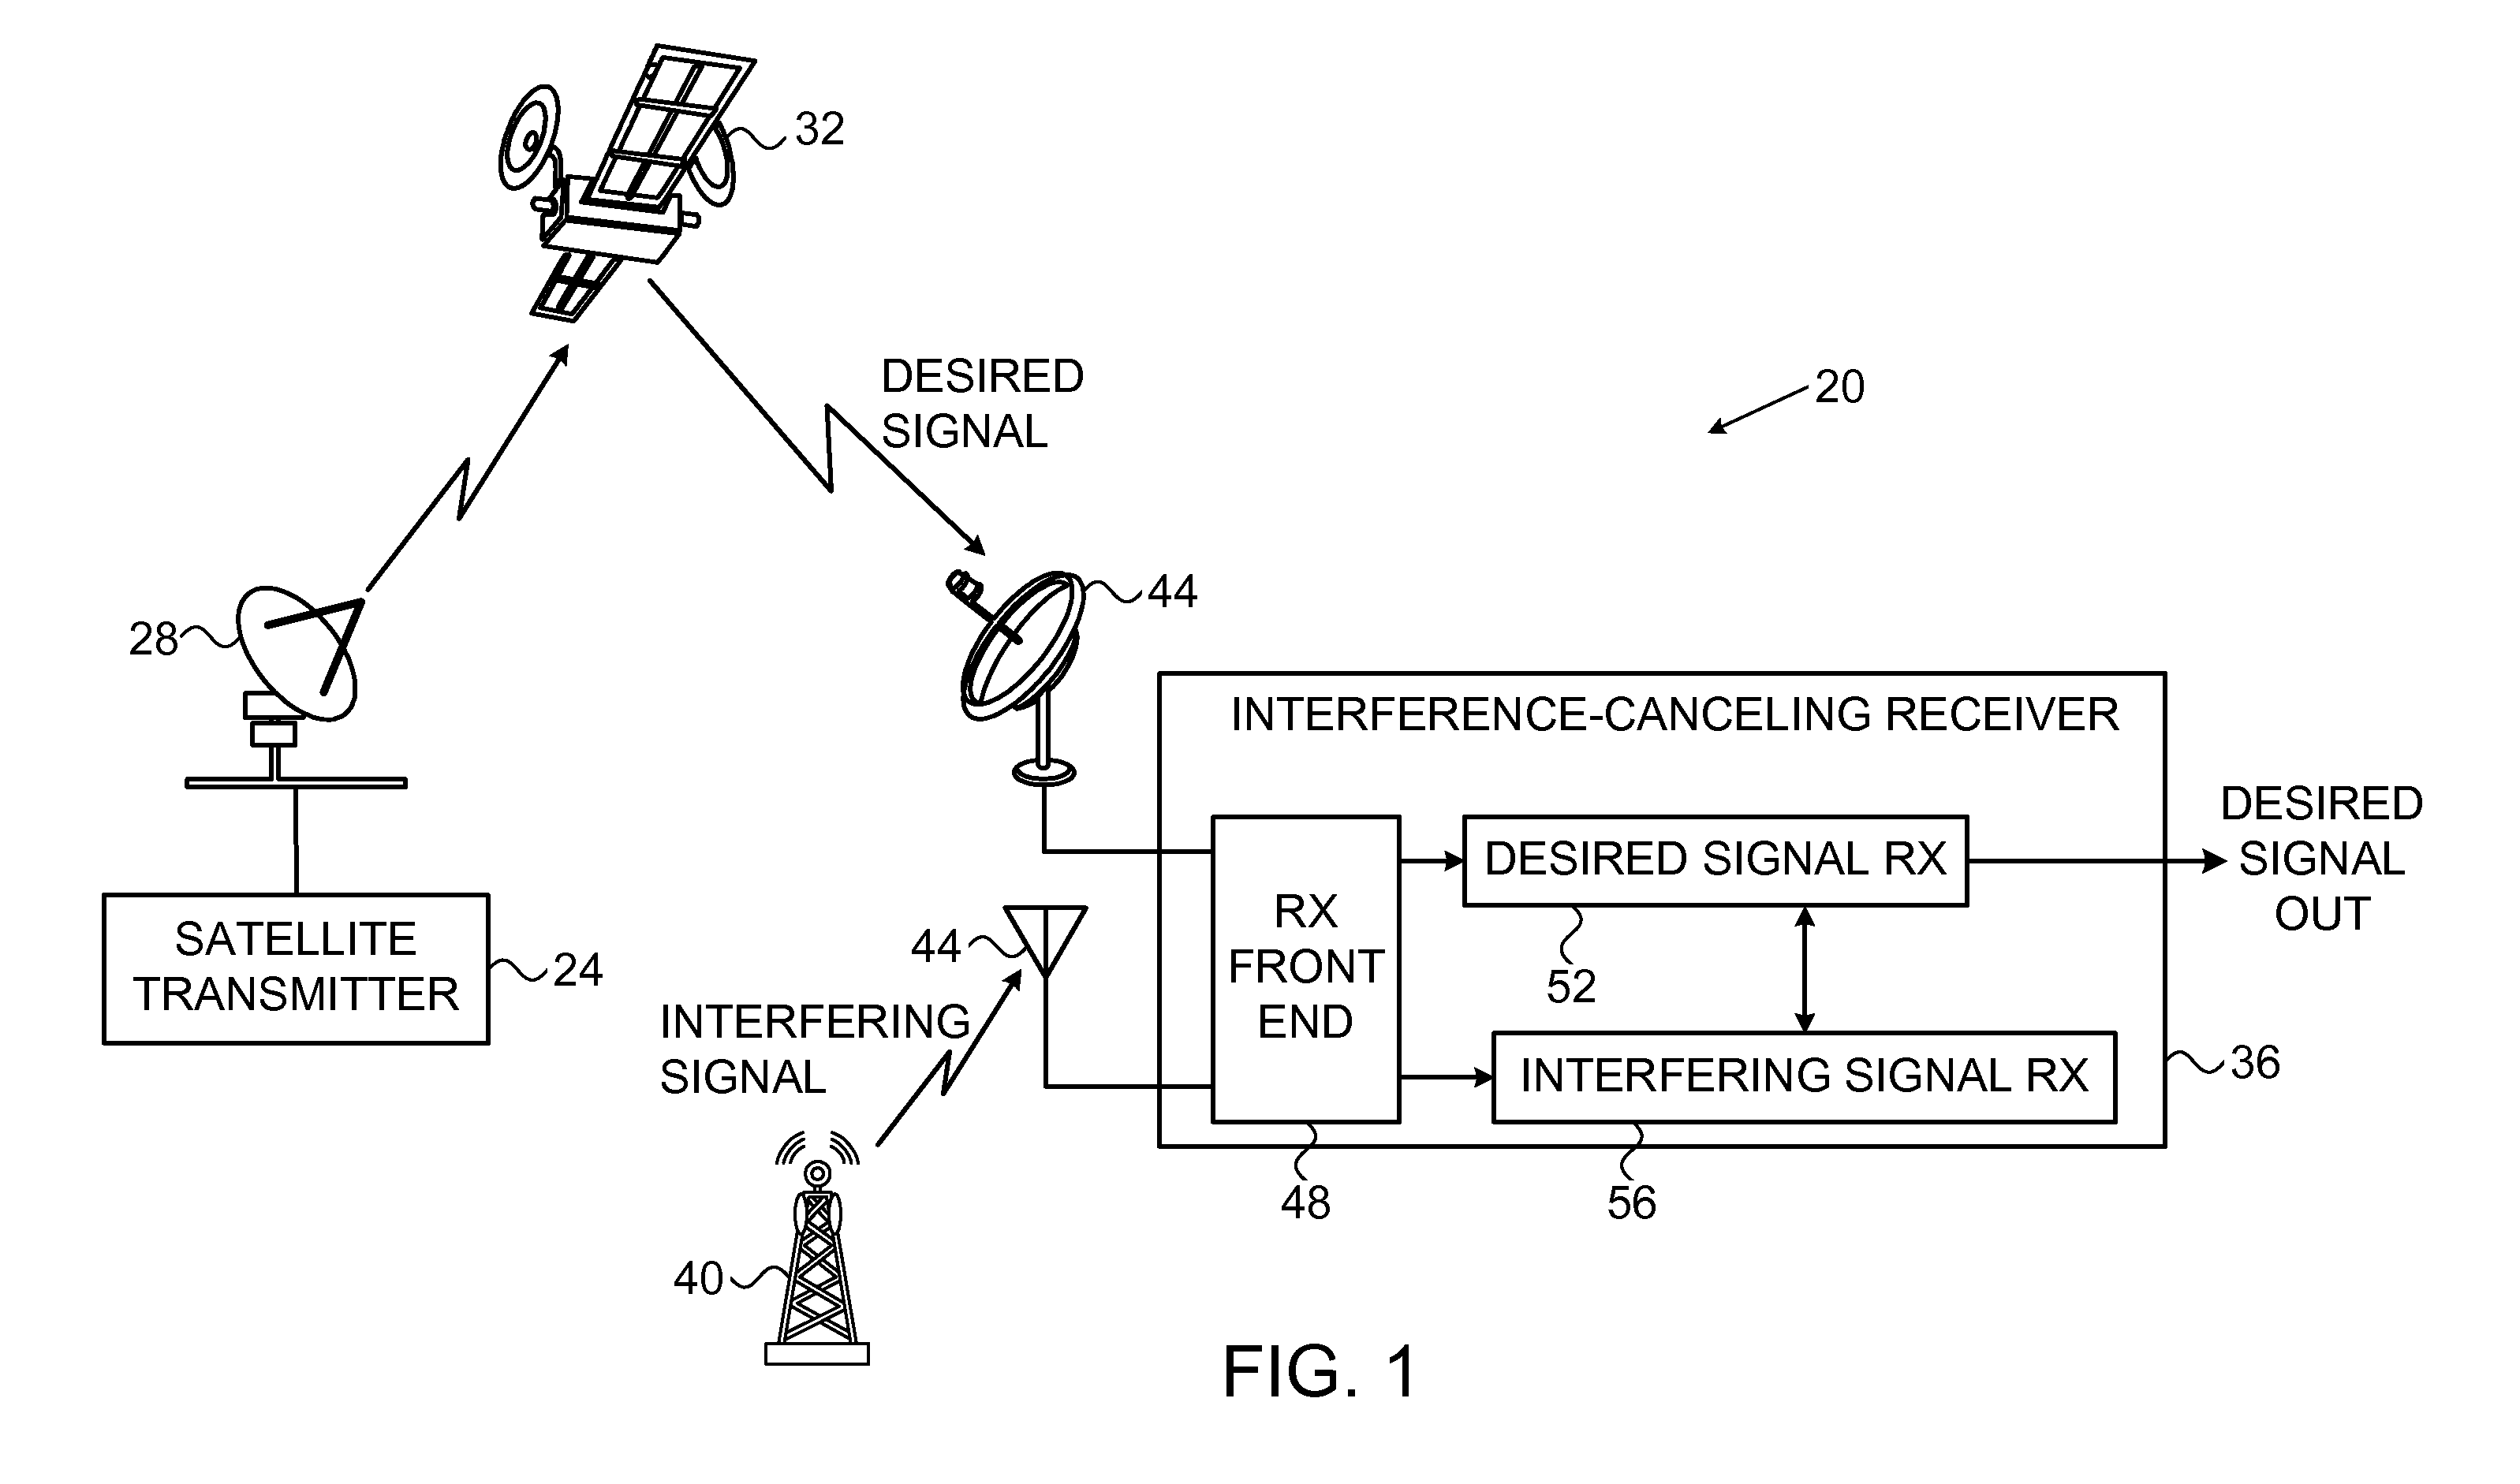 Satellite receiver with interfering signal cancellation